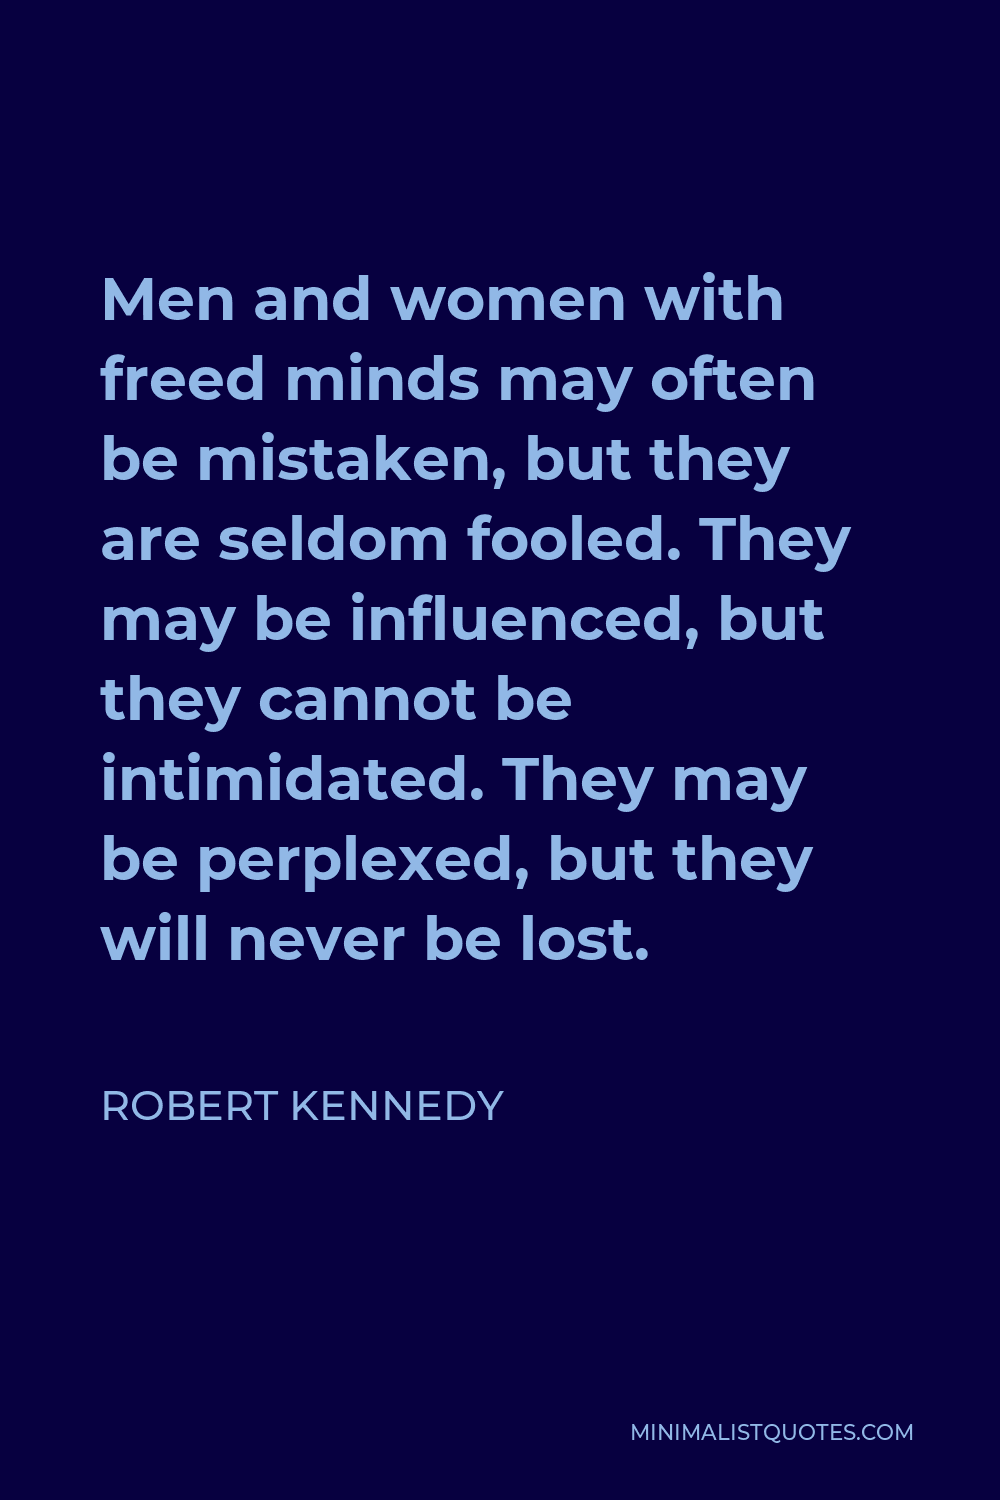 Robert Kennedy Quote - Men and women with freed minds may often be mistaken, but they are seldom fooled. They may be influenced, but they cannot be intimidated. They may be perplexed, but they will never be lost.